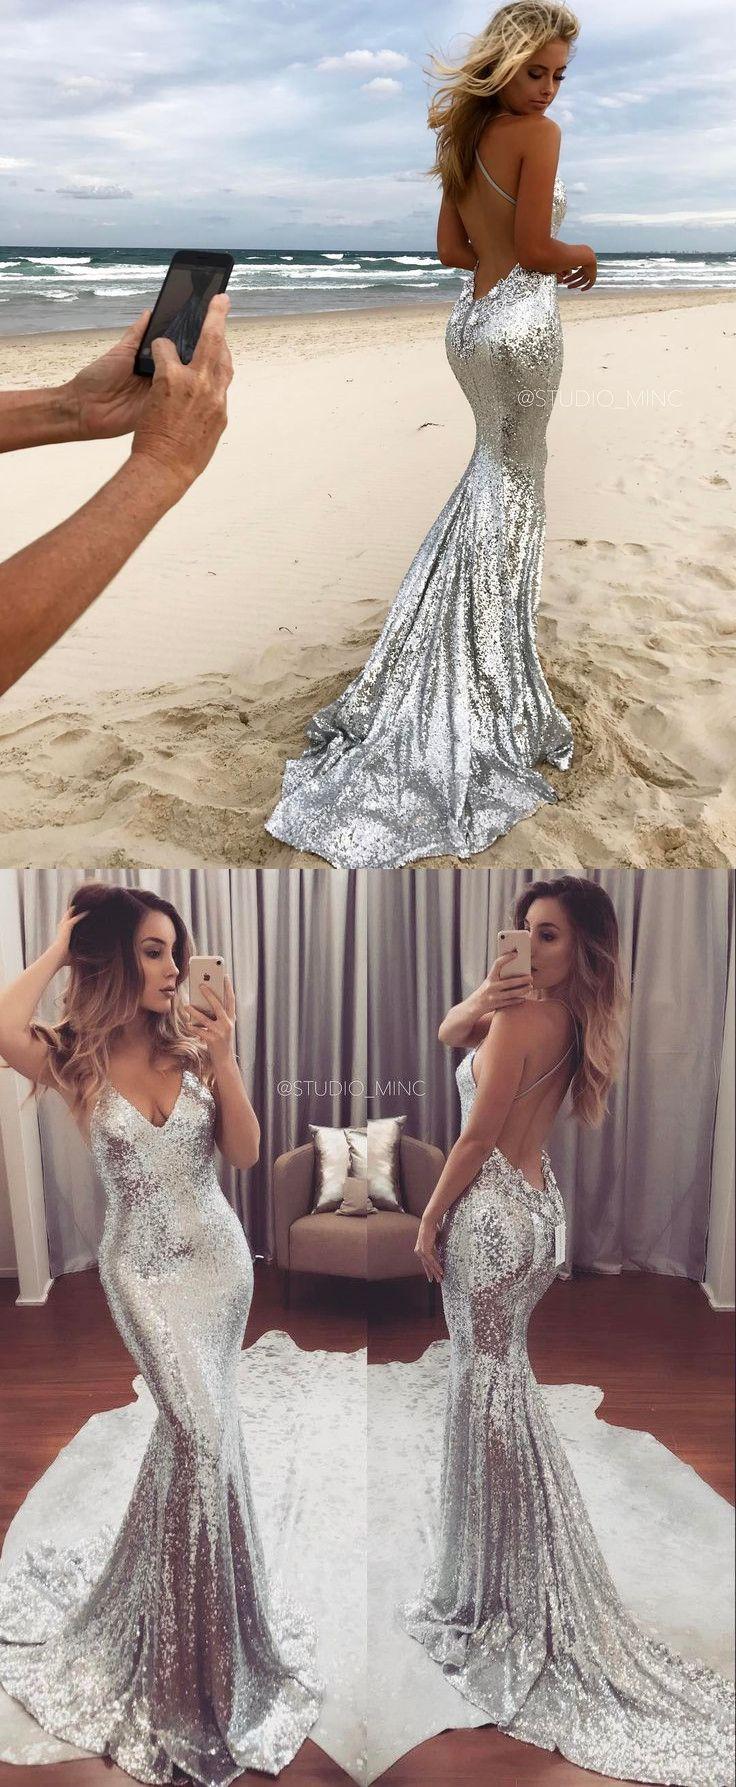 Wedding - Silver Prom Dress,Sexy Prom Dress,Sequined Prom Dresses,Formal Gown,Evening Gowns,Sequin Prom Gown For Teens